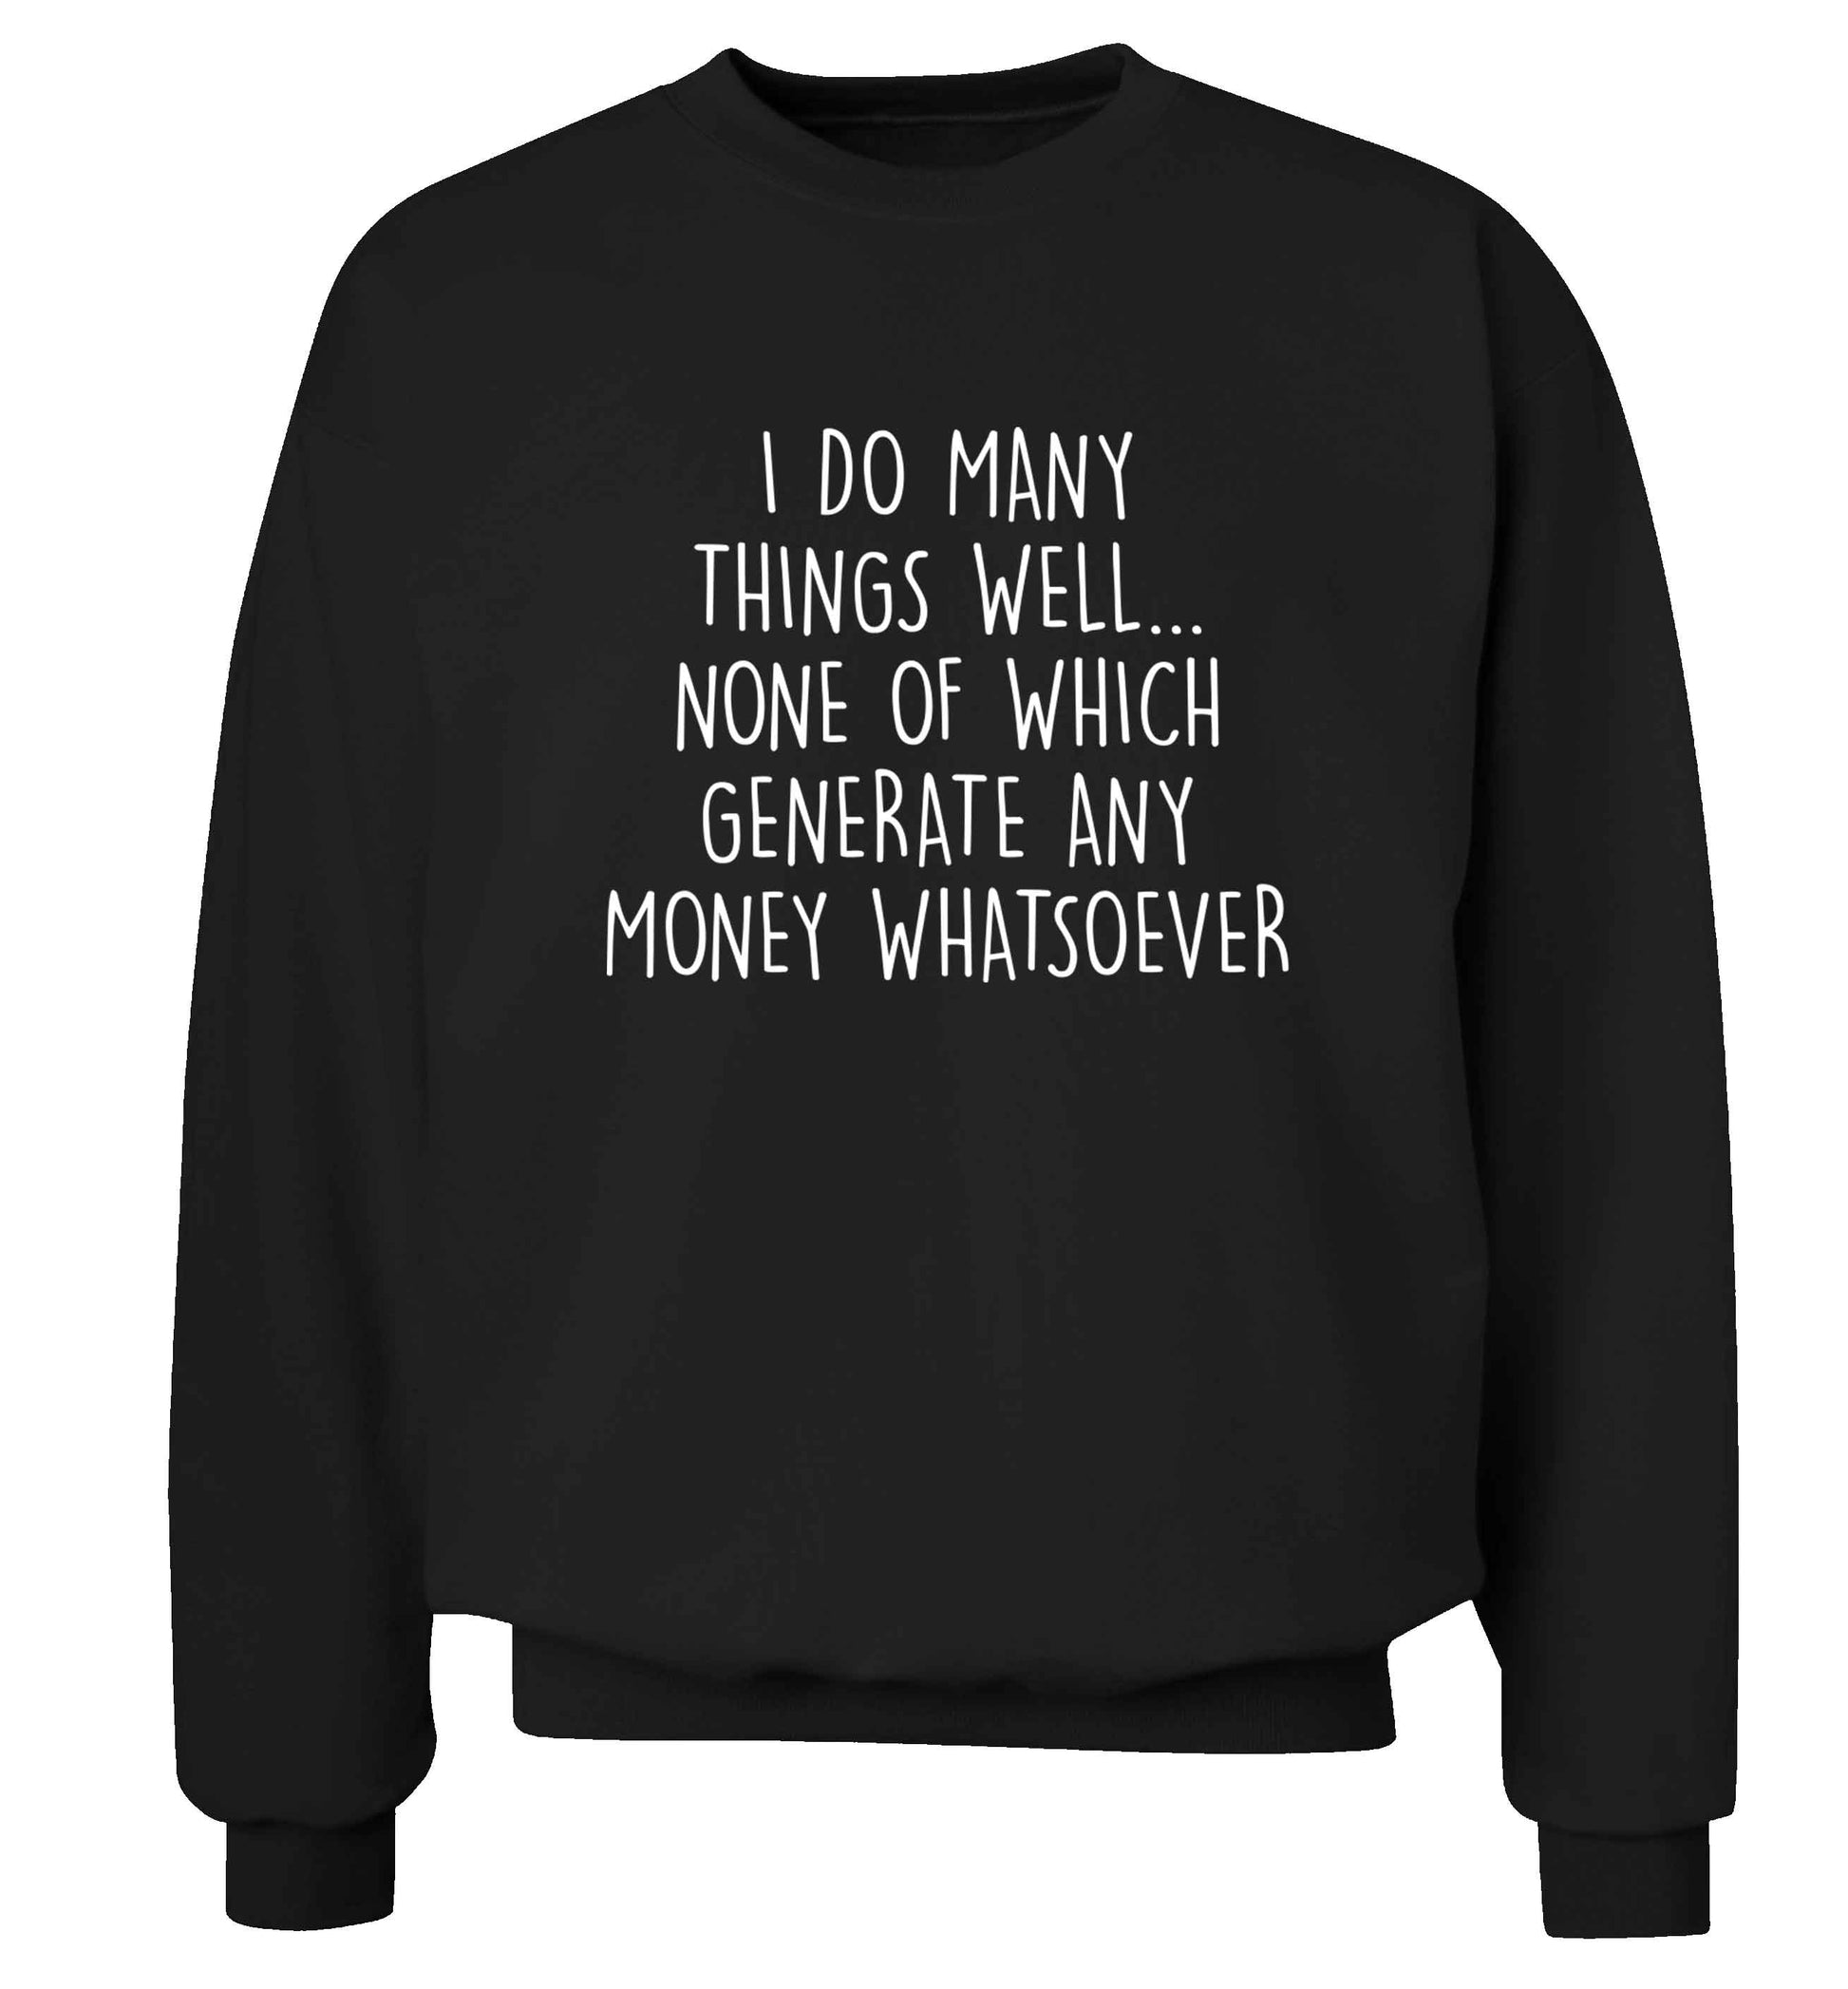 I do many things well none of which generate income Adult's unisex black Sweater 2XL